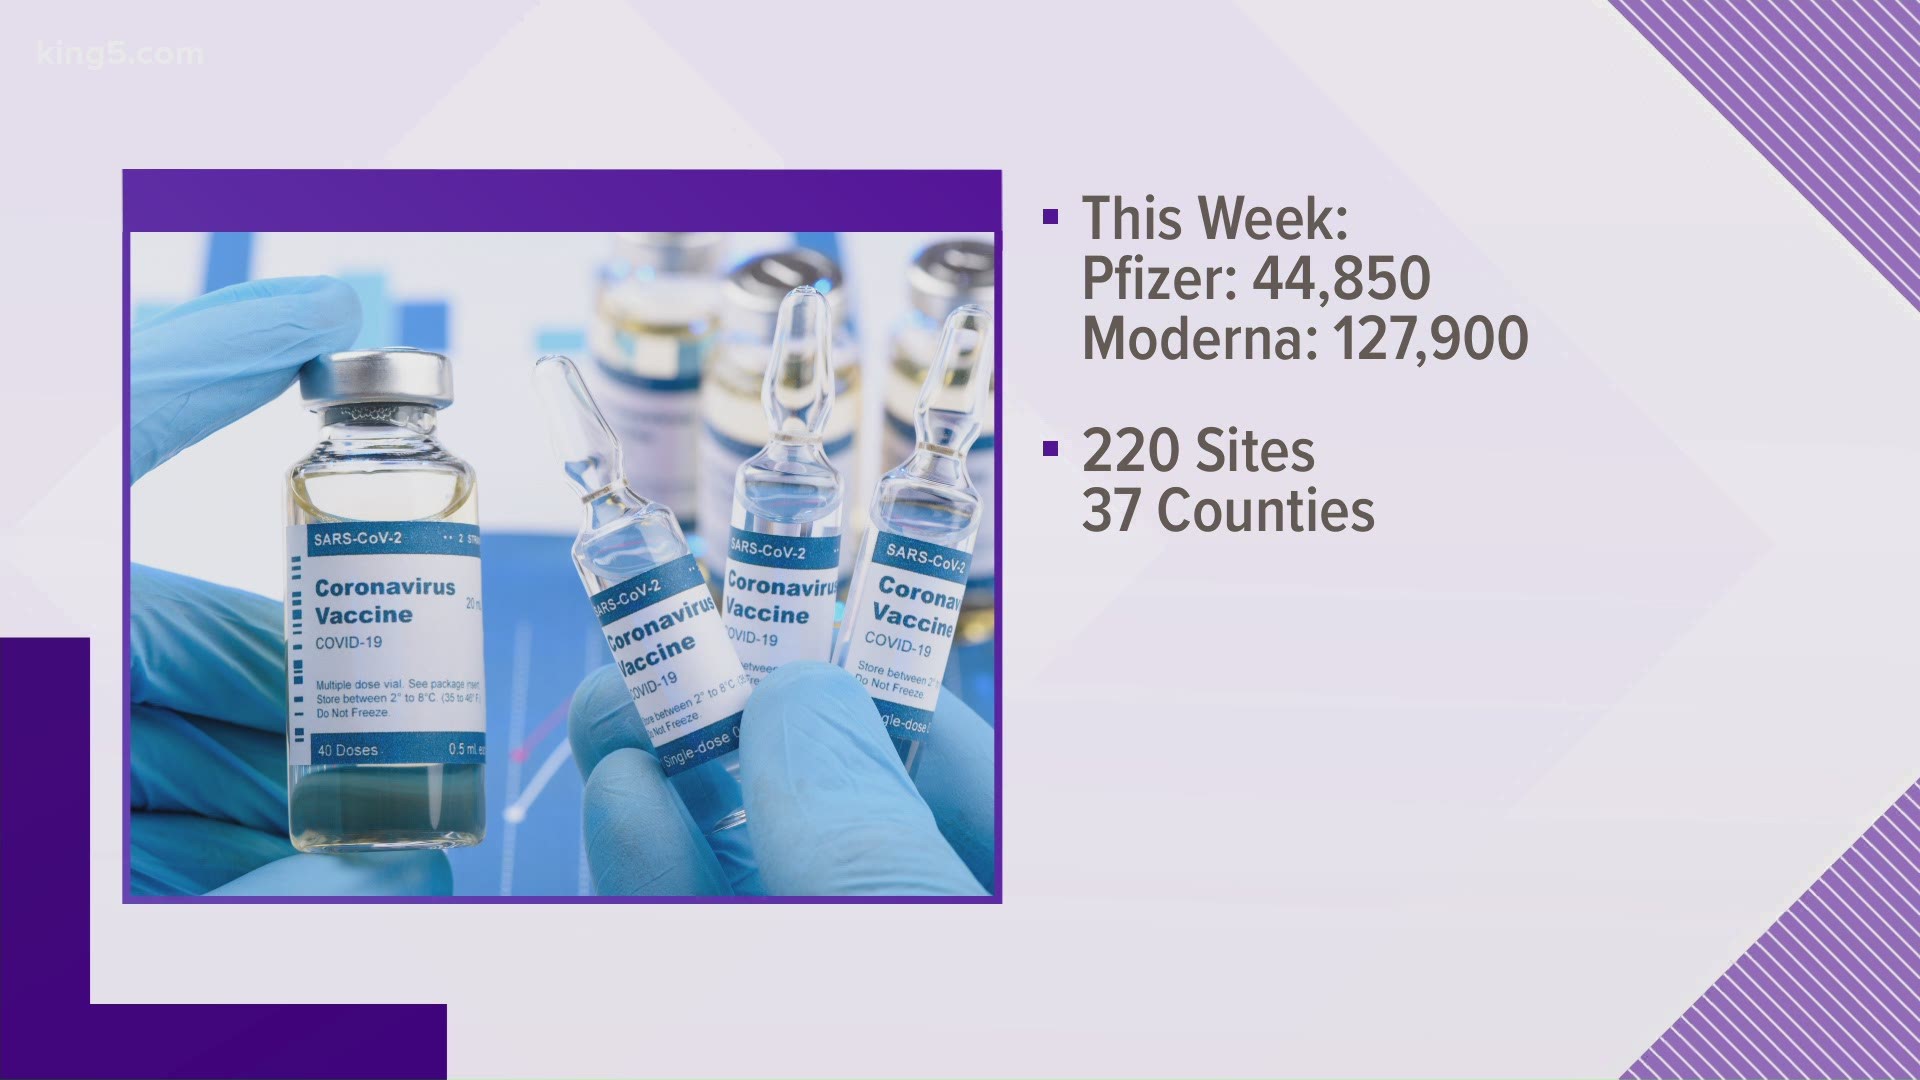 This week, the Washington Department of Health distributed a total of 172,750 doses of the vaccine to health providers to be given to at-risk health workers.